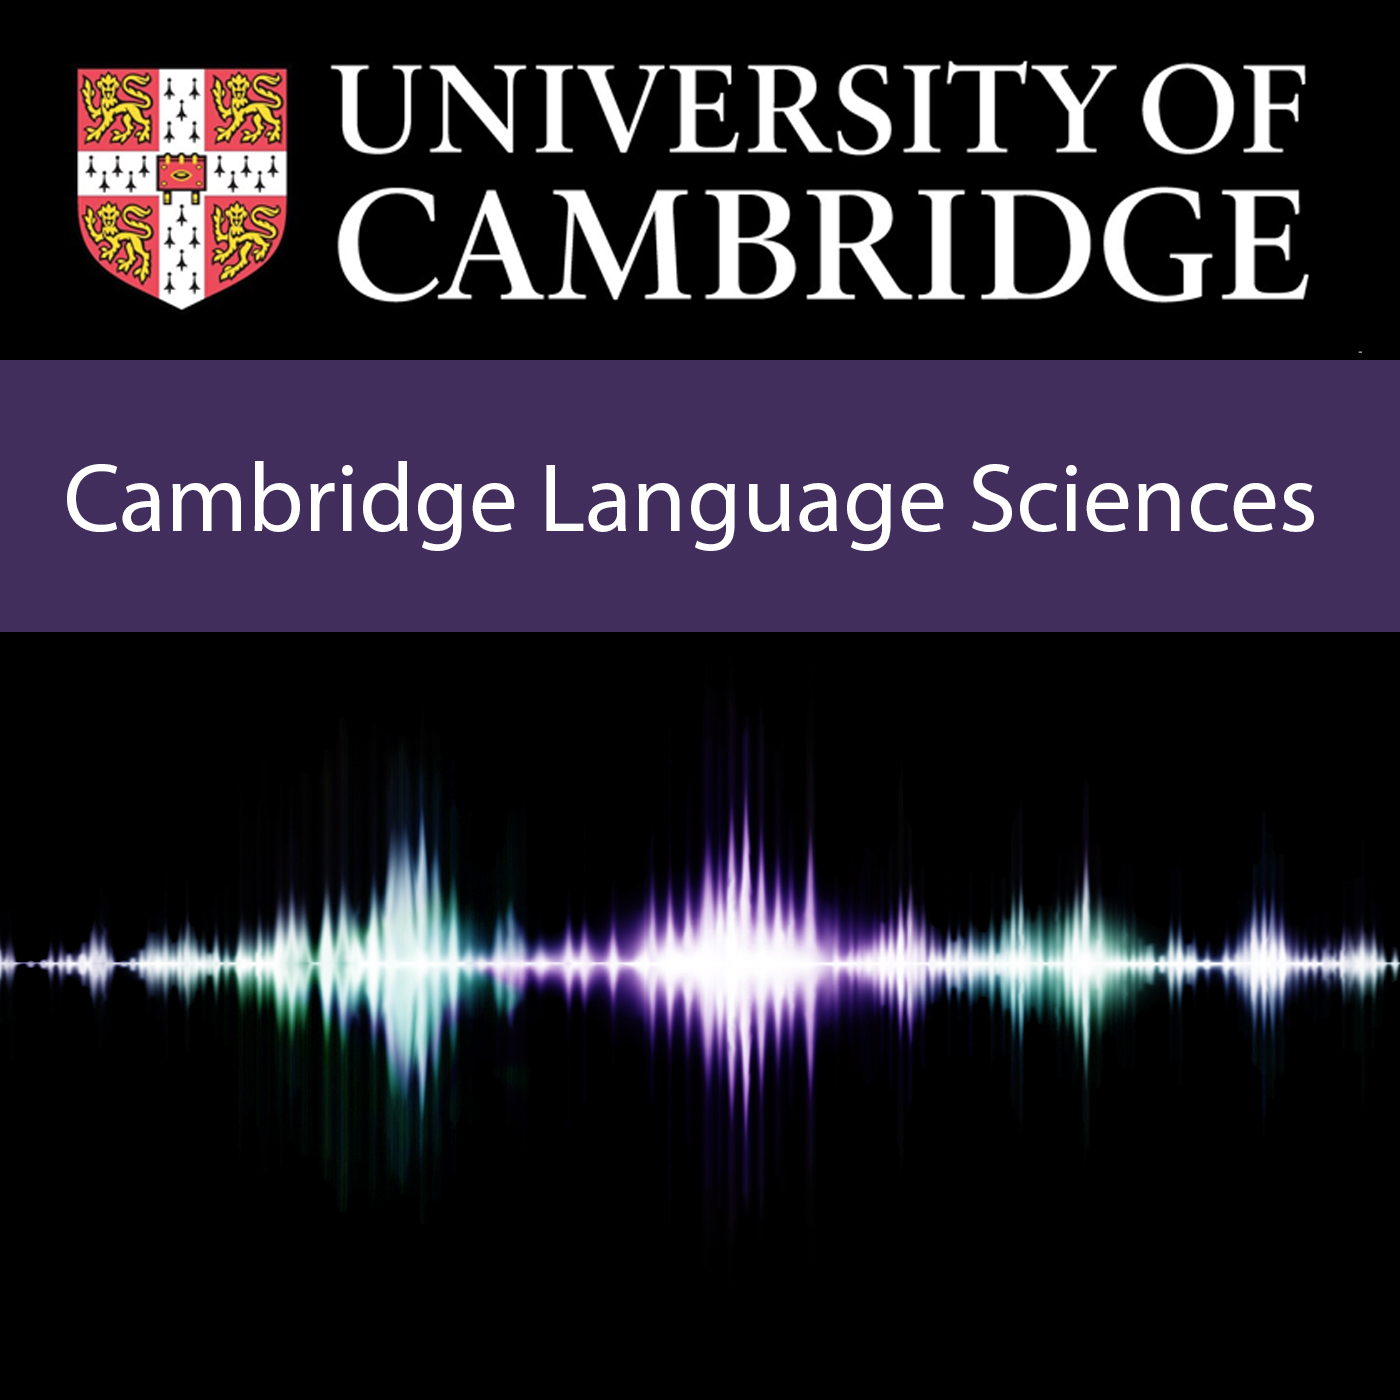 Turn-taking, language processing and the evolution of language's image